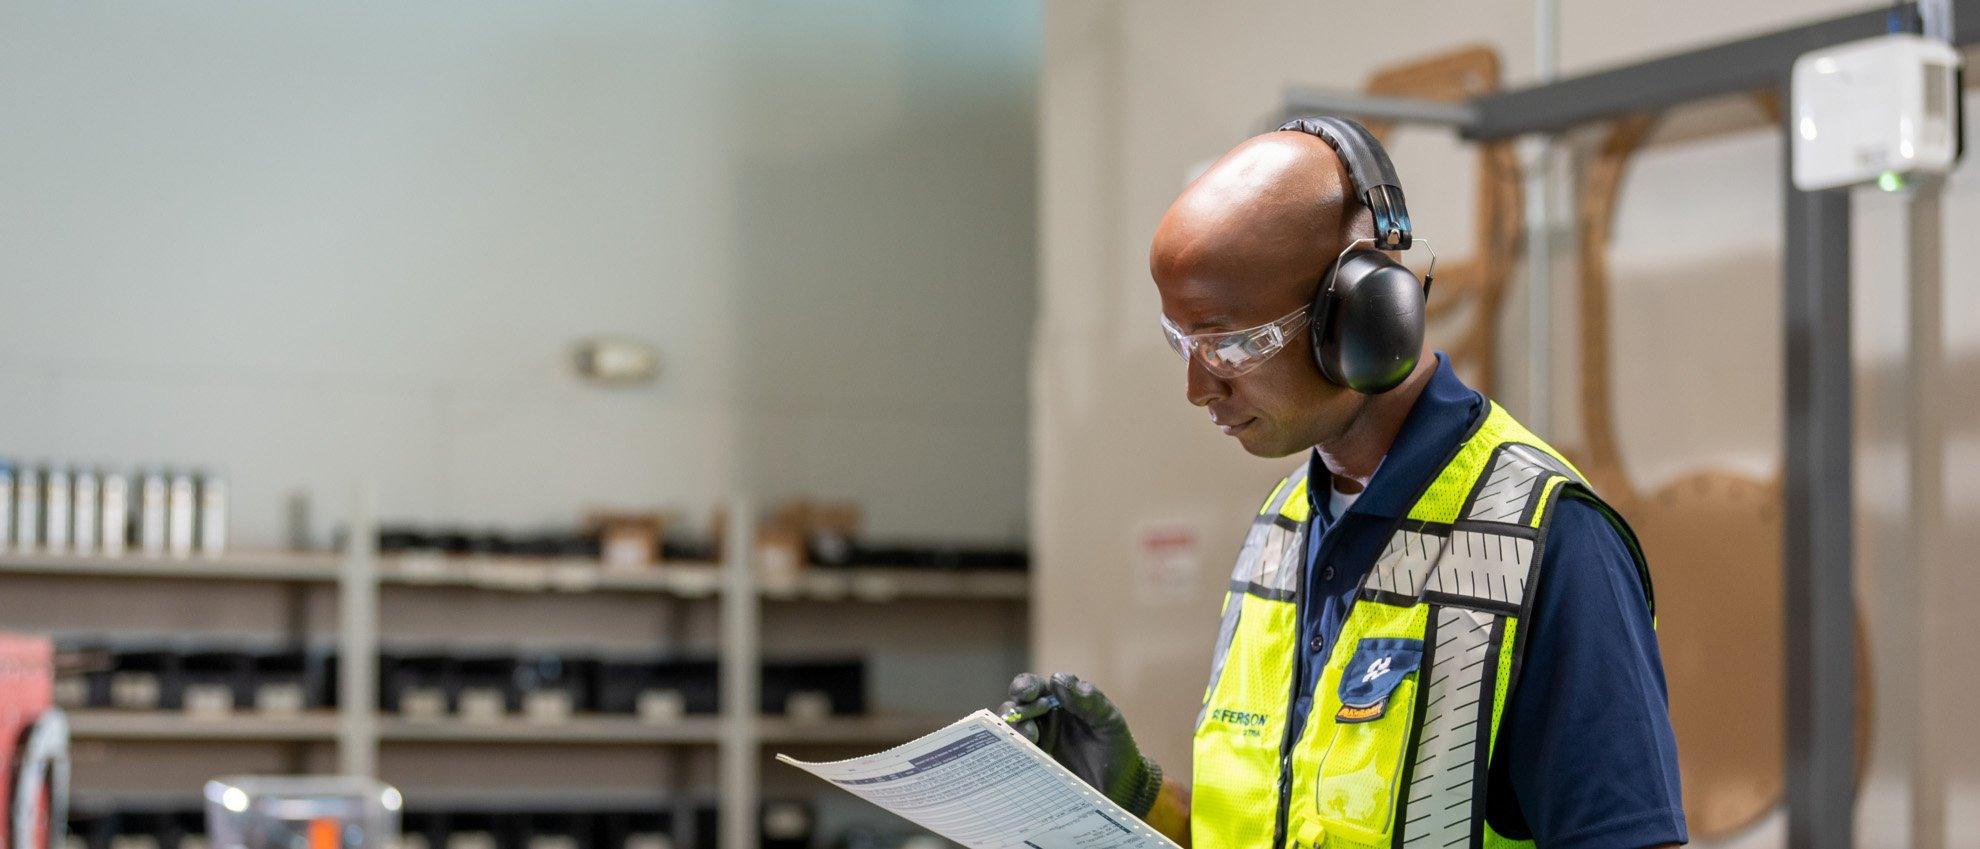 A Ferguson associate wearing safety glasses and ear protection checks products against a list.